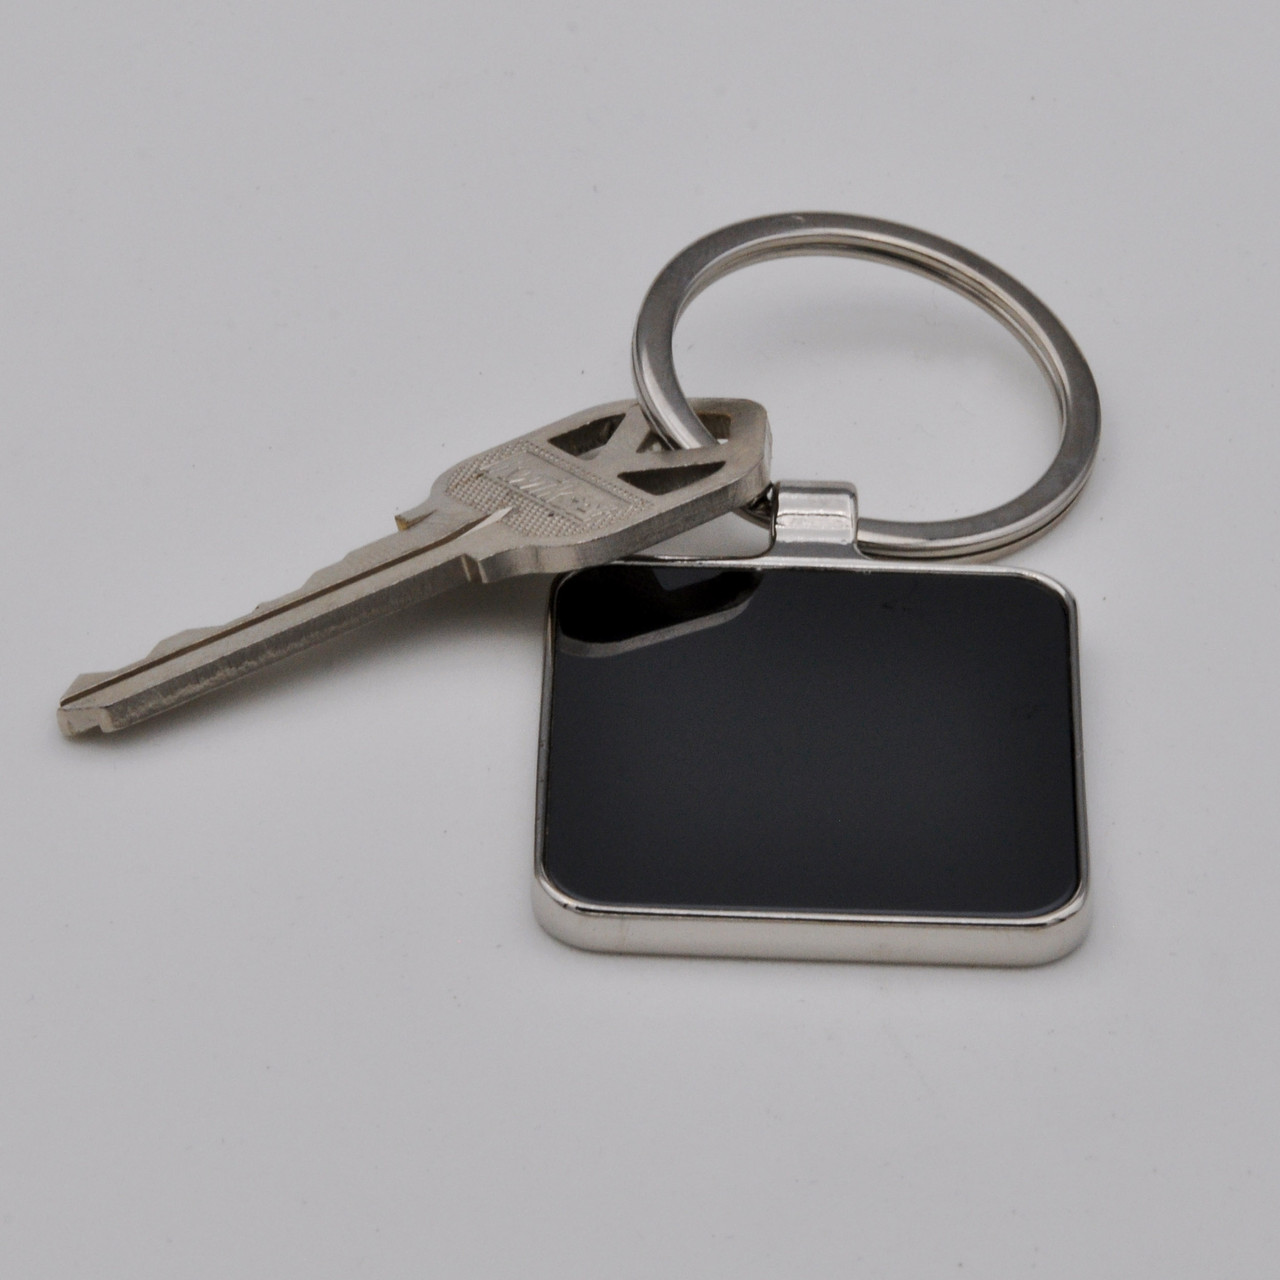 Gunmetal Key Fob Hardware with Key Rings Sets - 1 Inch or 1.25